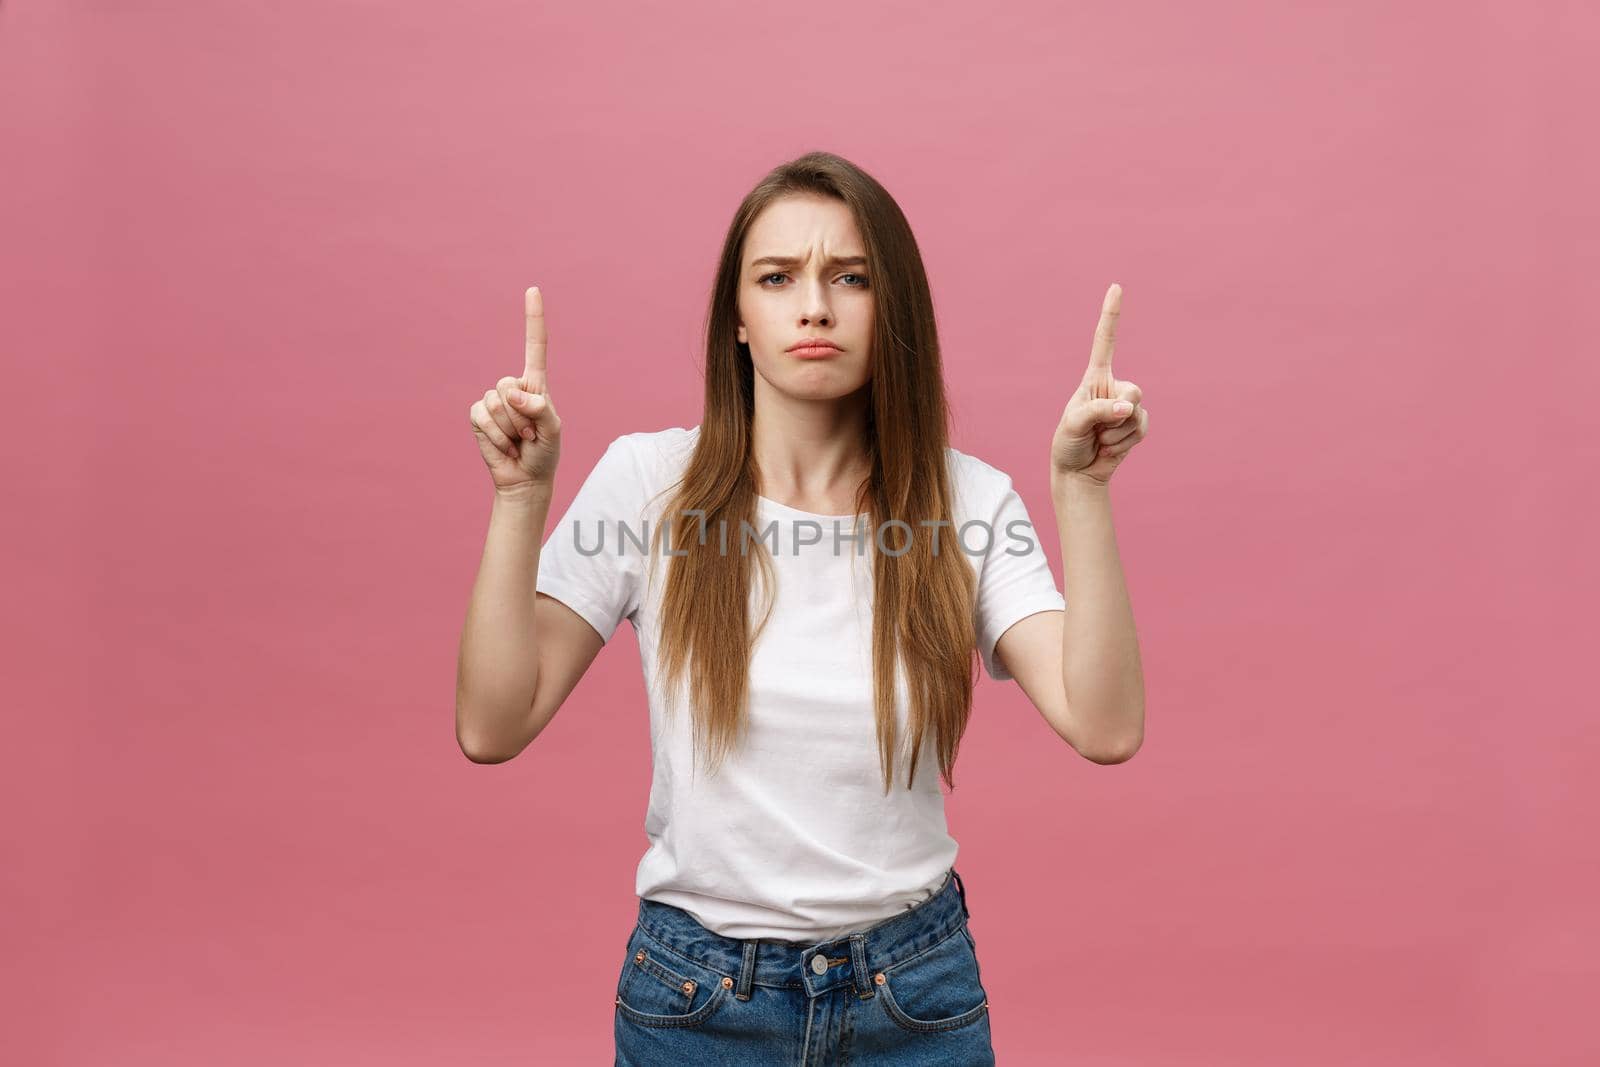 Closeup of serious strict young woman wears white shirt looks stressed and pointing up with finger isolated over pink background.